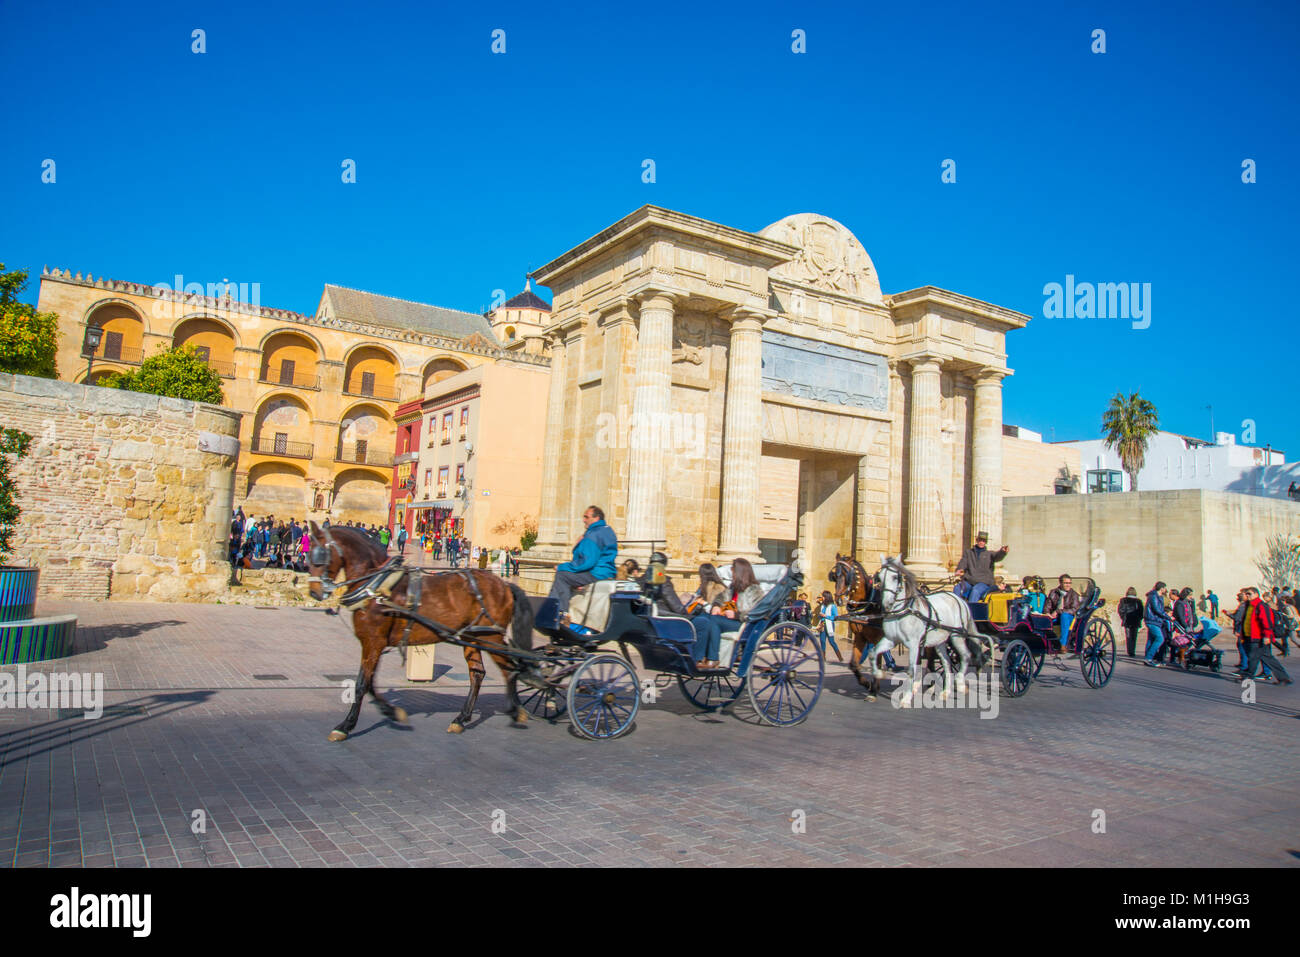 Horse-drawn carriages at Puerta del Puente. Cordoba, Spain. Stock Photo